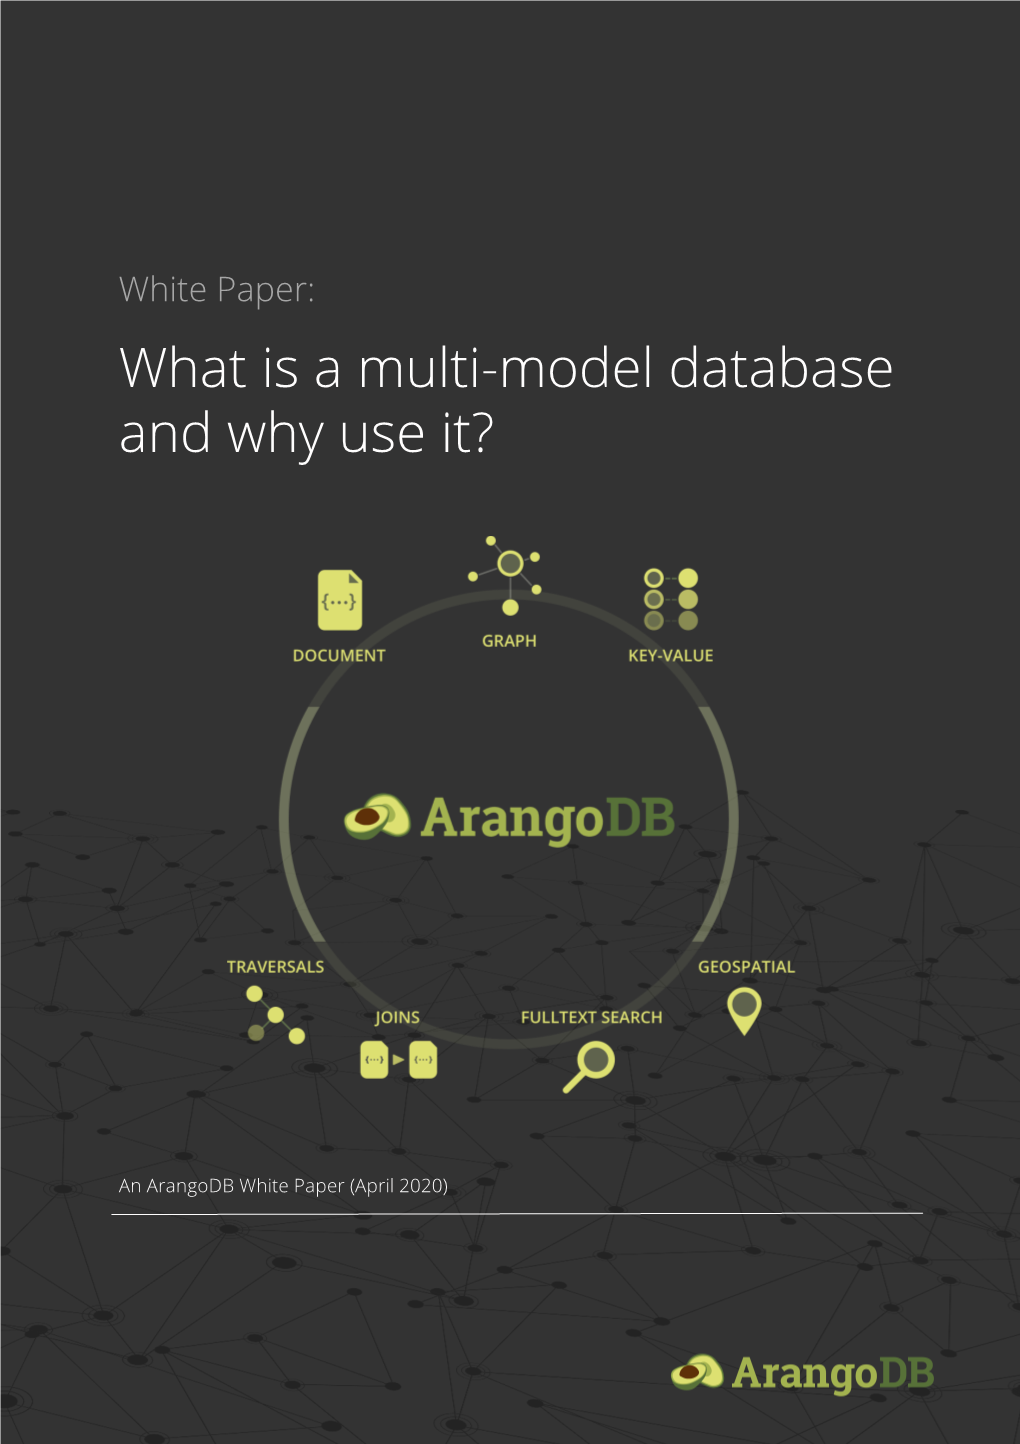 What Is a Multi-Model Database and Why Use It?